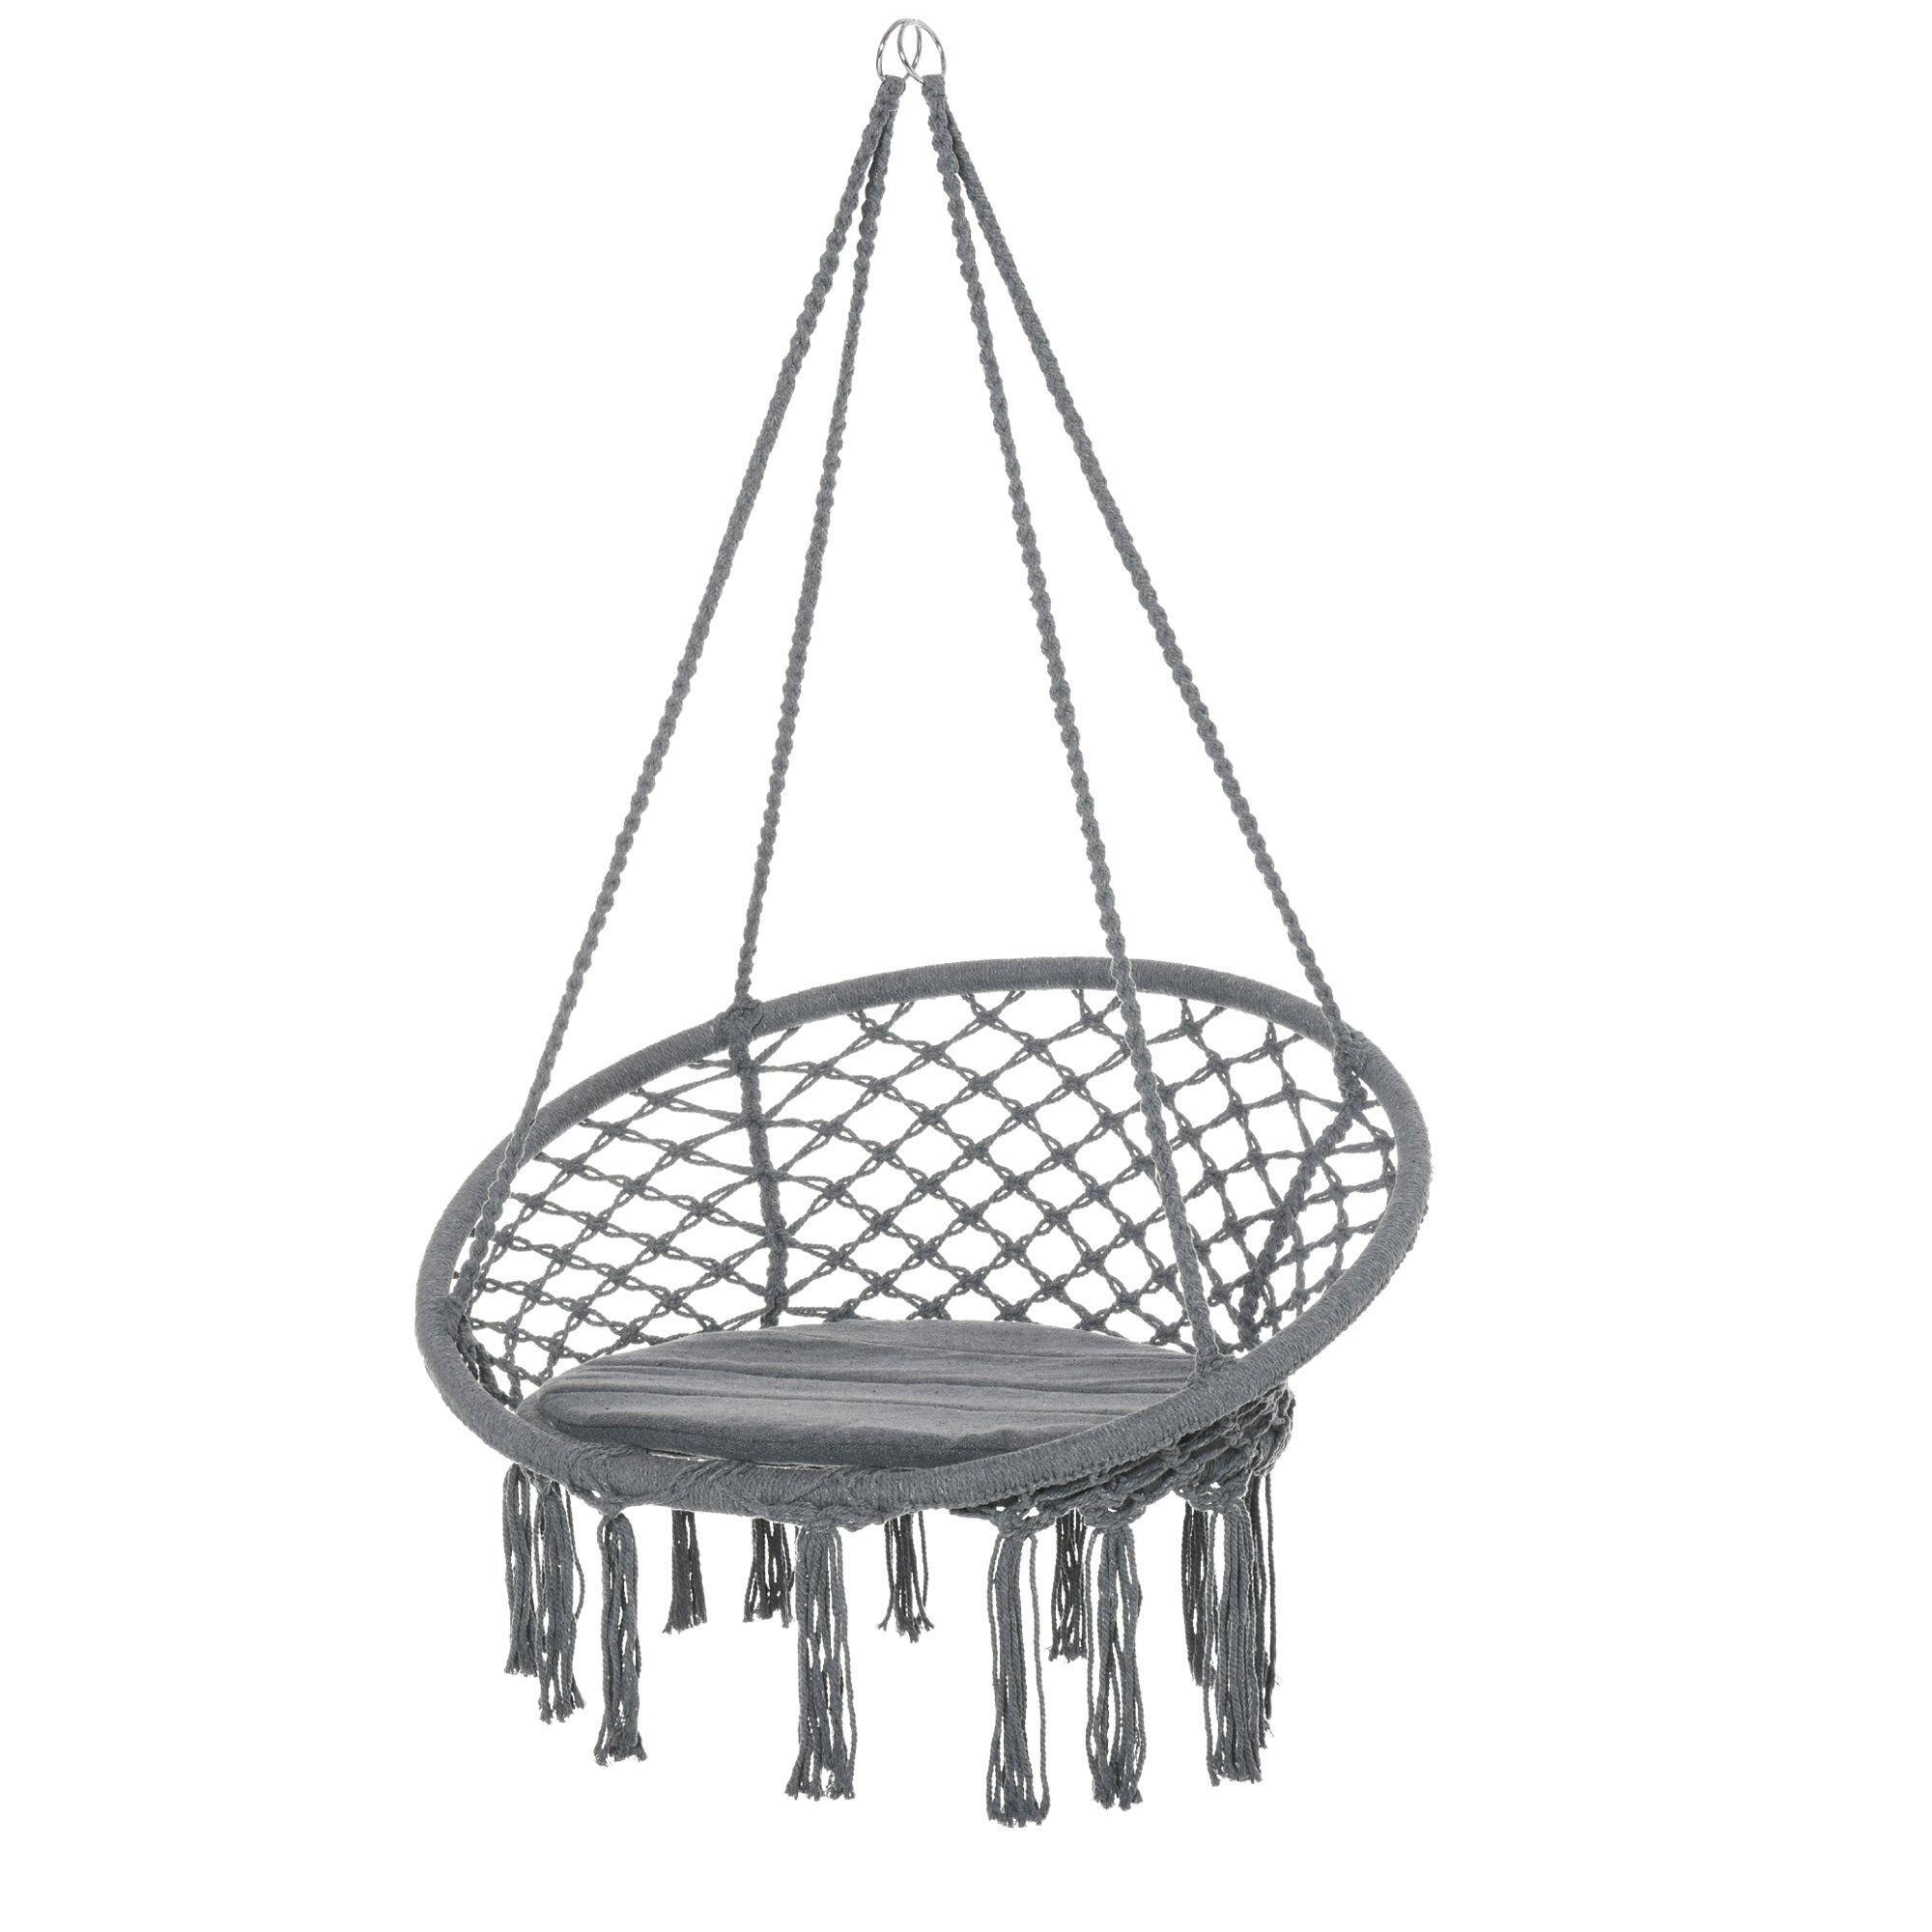 Macrame Hanging Chair Swing Hammock for Indoor and Outdoor Use - image 1